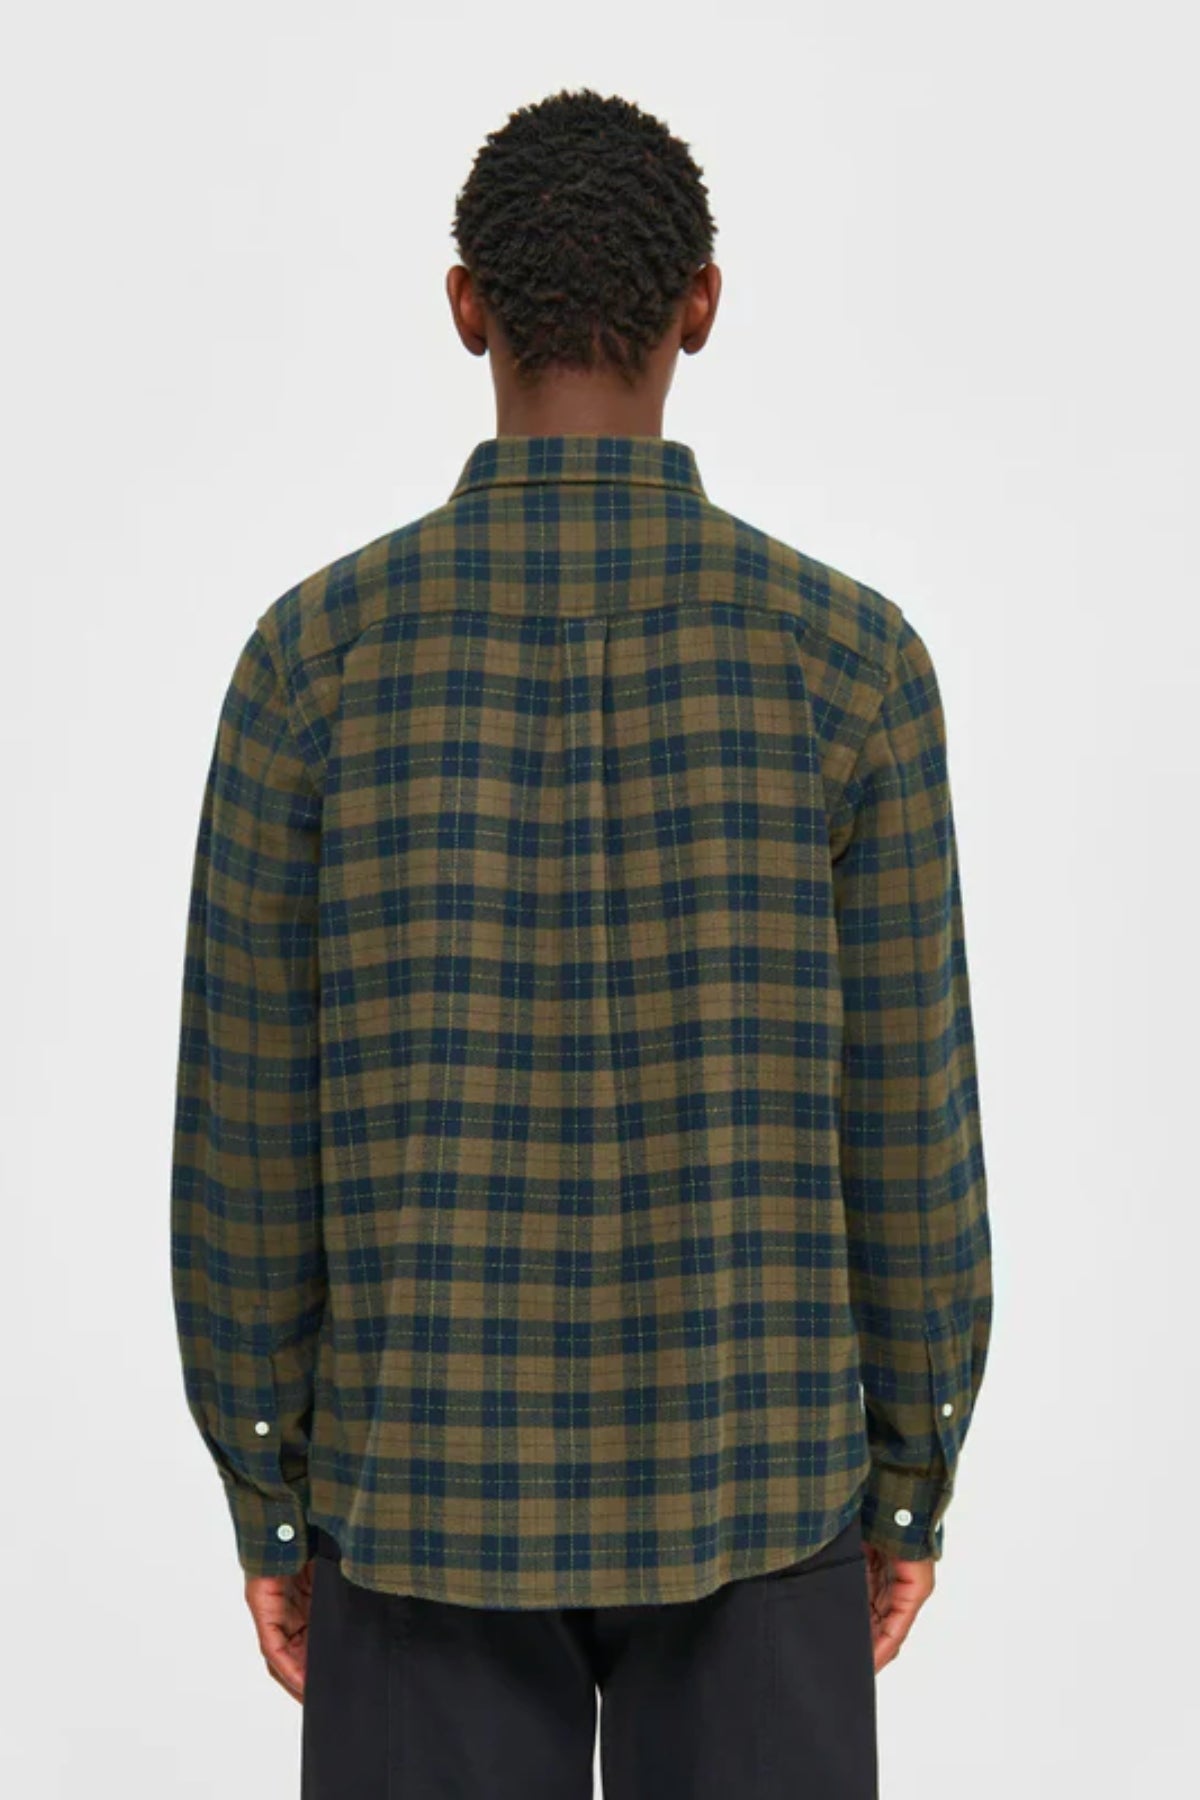 Chemise Loose fit checkered shirt - Knowledge cotton apparel